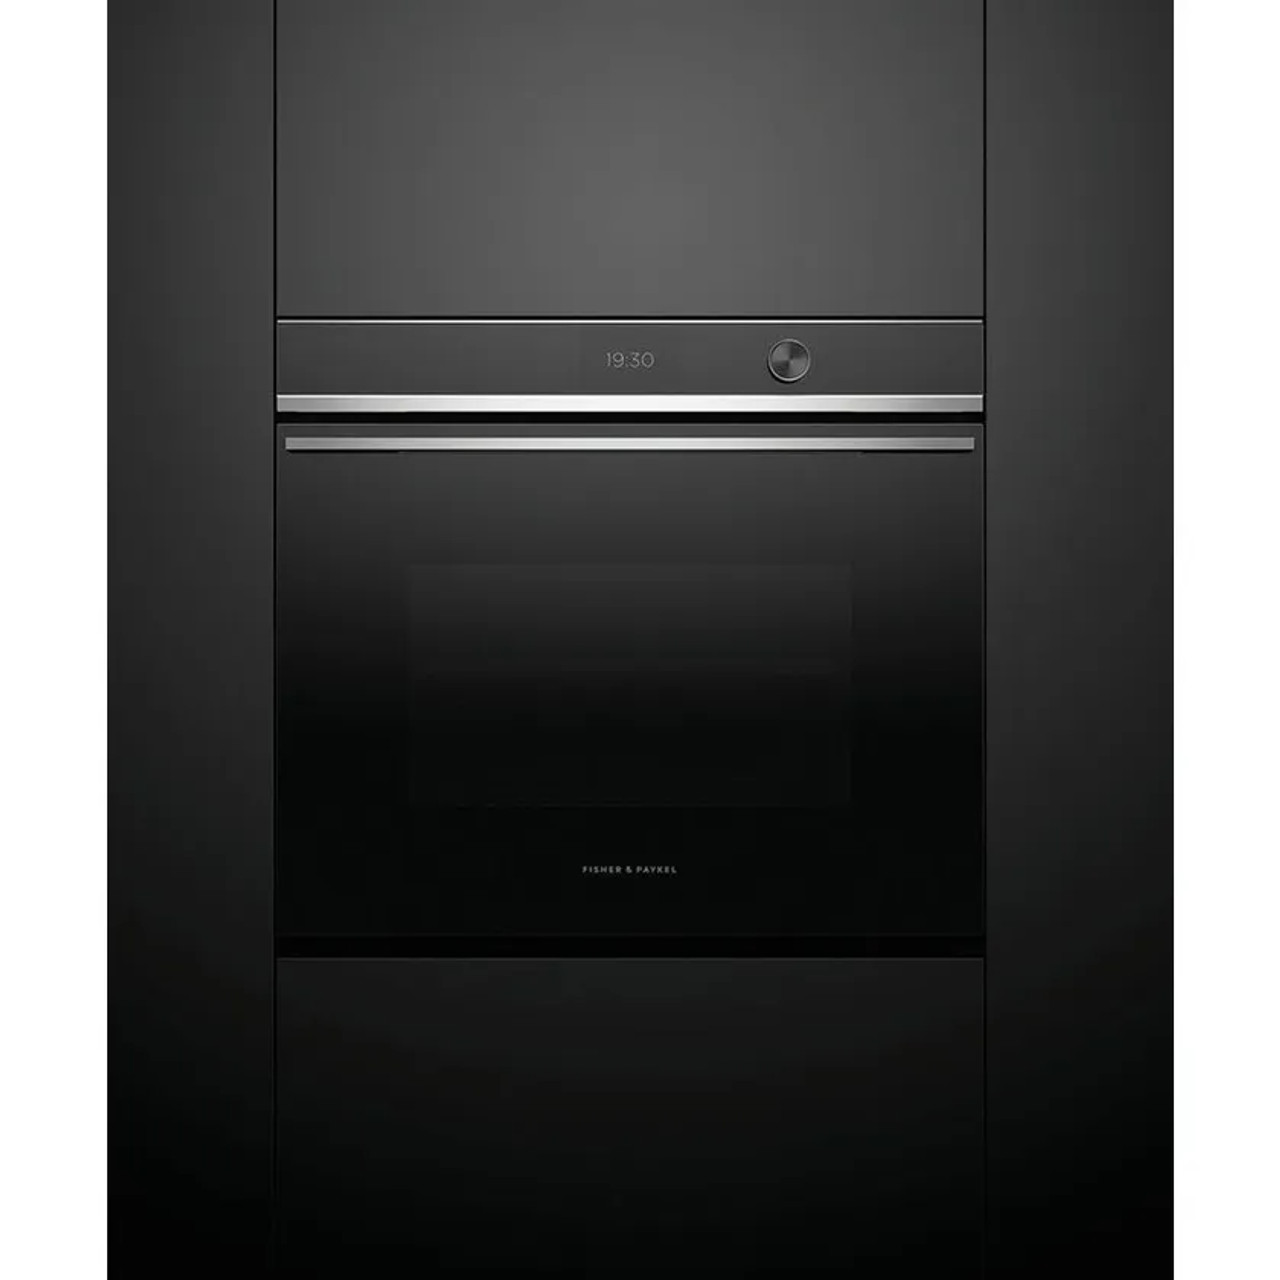 OB76SDPTDX2 -  76cm Pyrolytic Oven - Stainless Steel